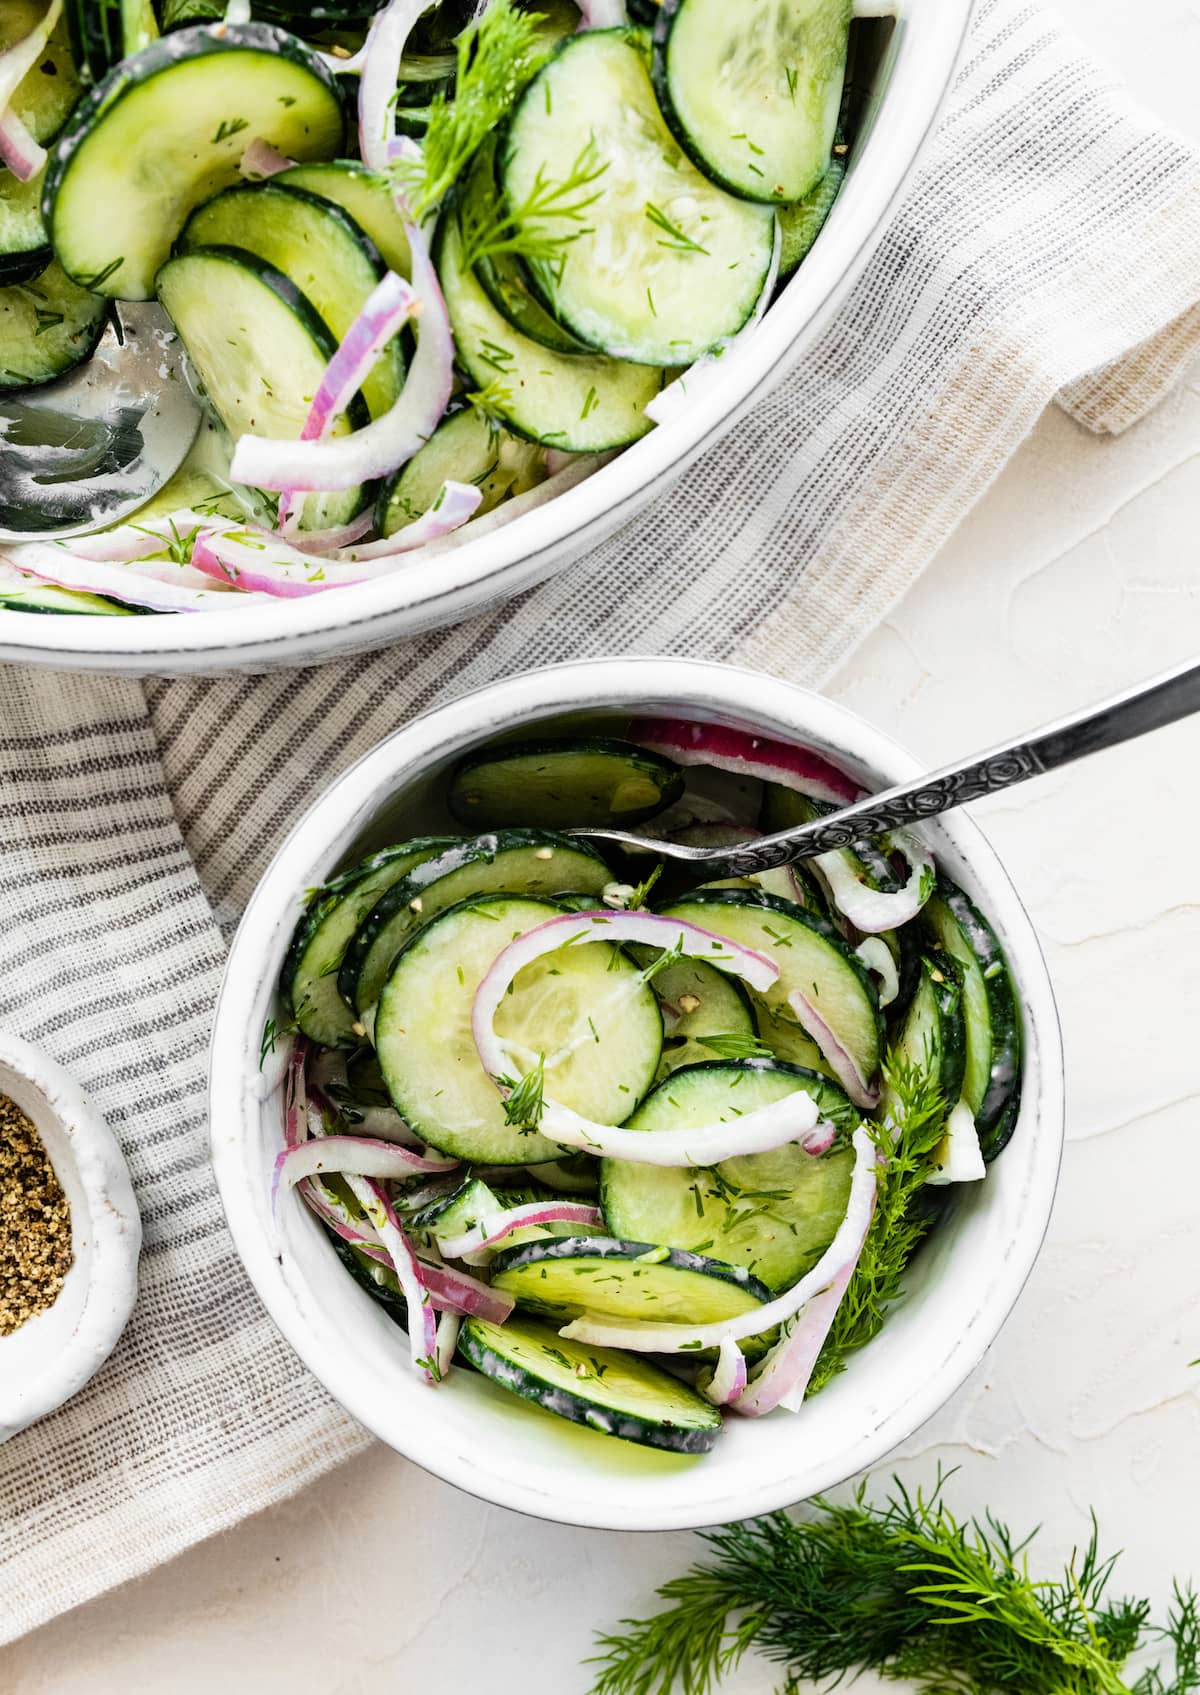 Creamy cucumber salad in a small white bowl with a metal fork near a larger bowl of the same salad.